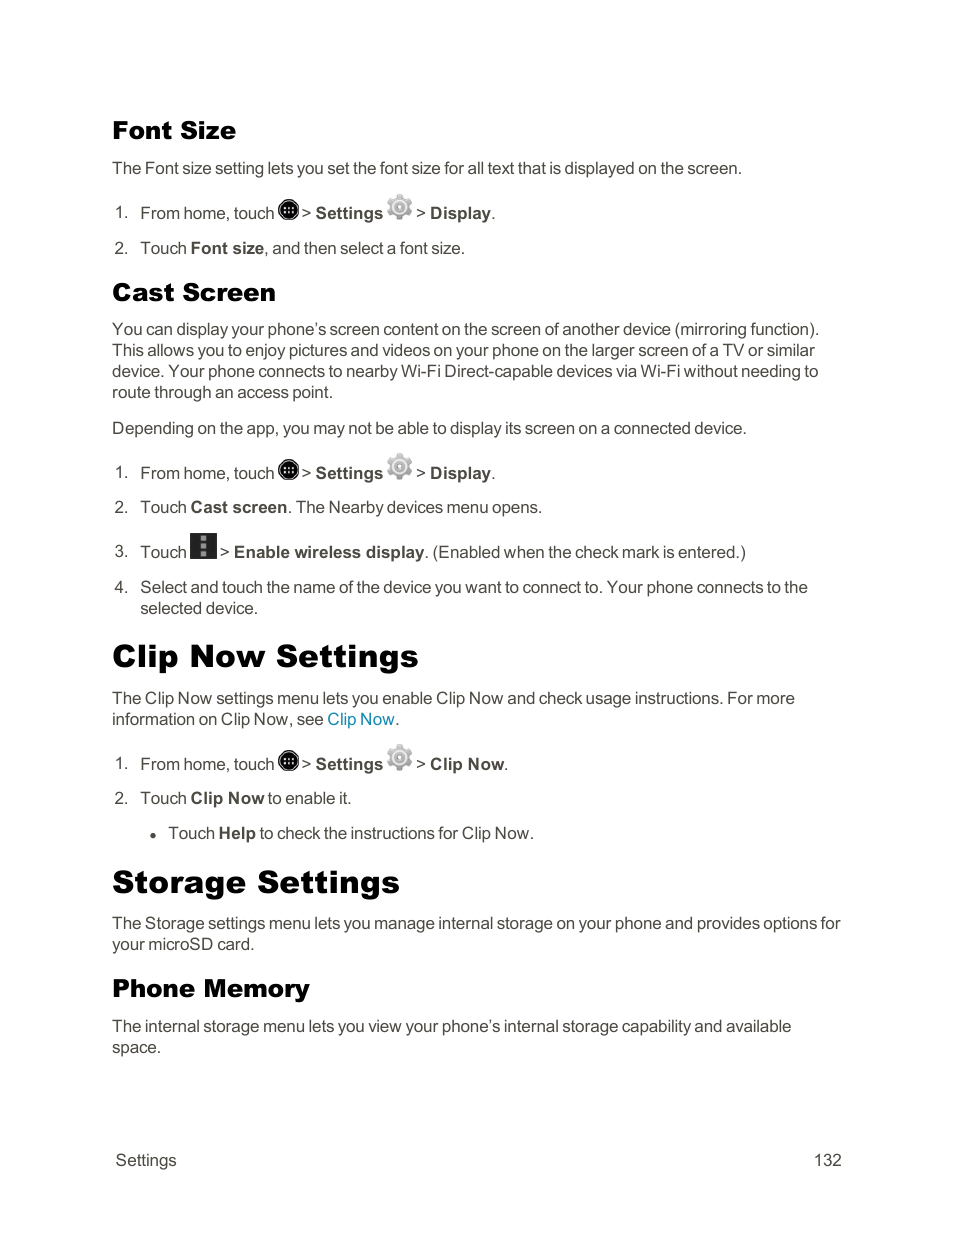 Font size, Cast screen, Clip now settings | Storage settings, Phone memory | Sharp AQUOS Crystal User Manual | Page 142 / 171